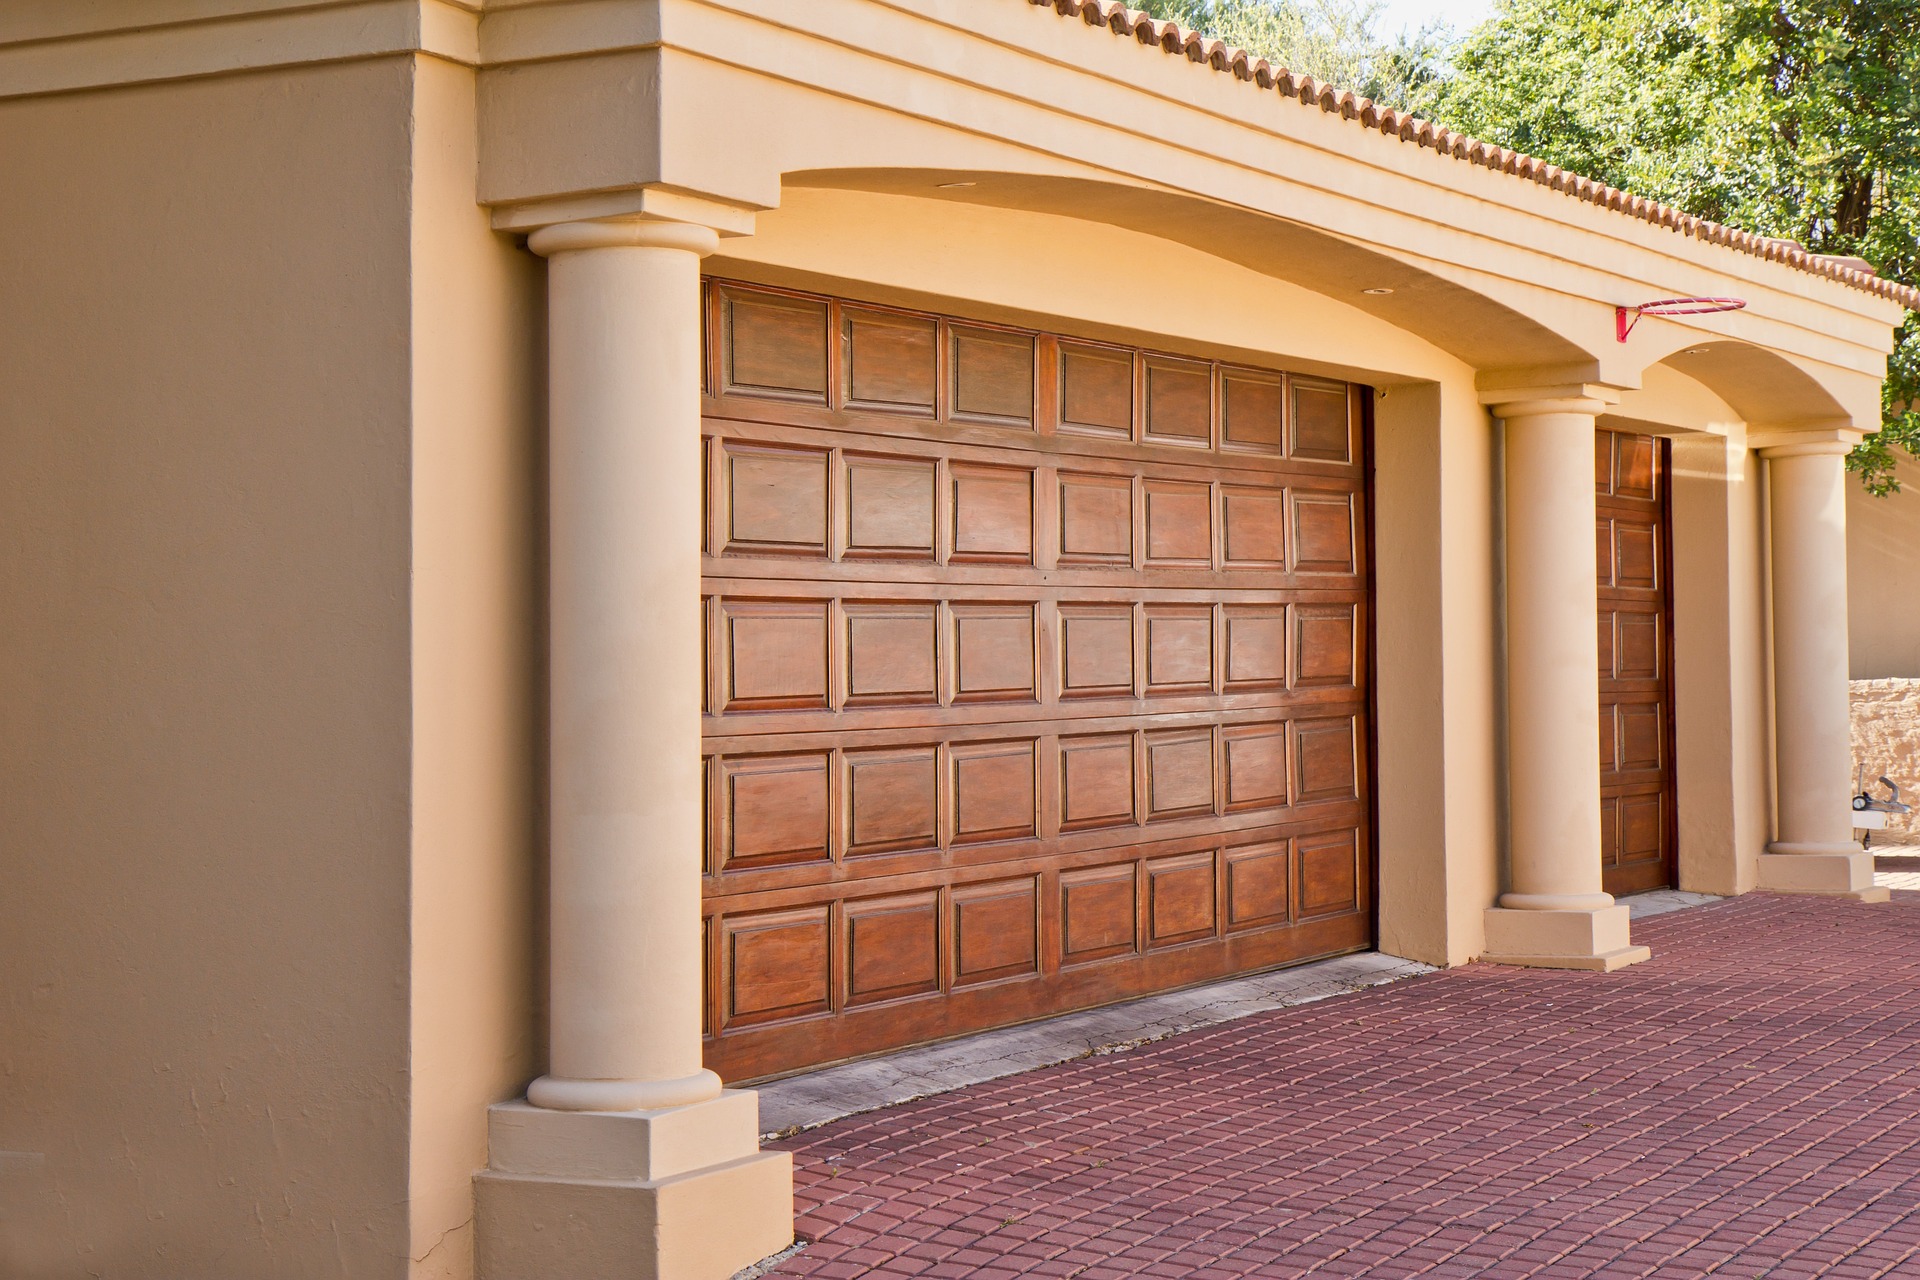 The Advantage of Insulated Garage Doors